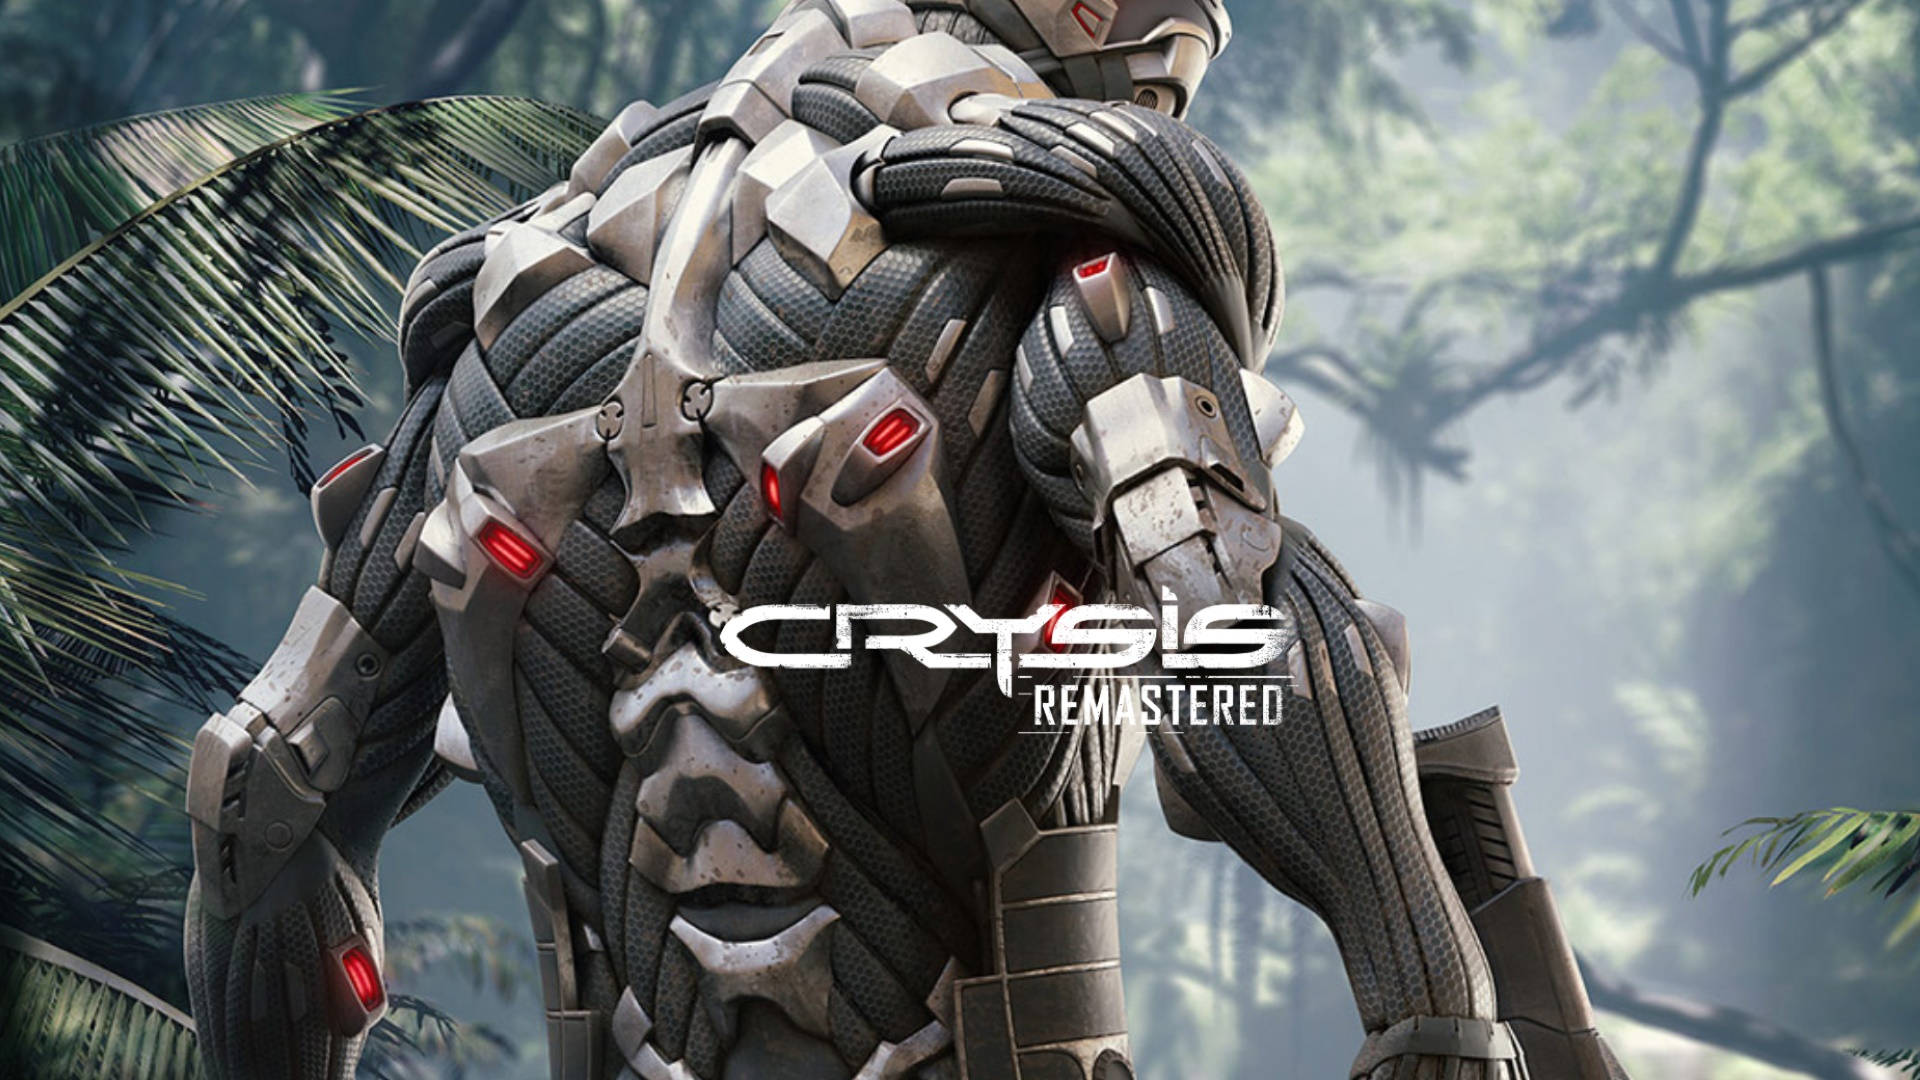 "Play Crysis Remastered Today!" Wallpaper